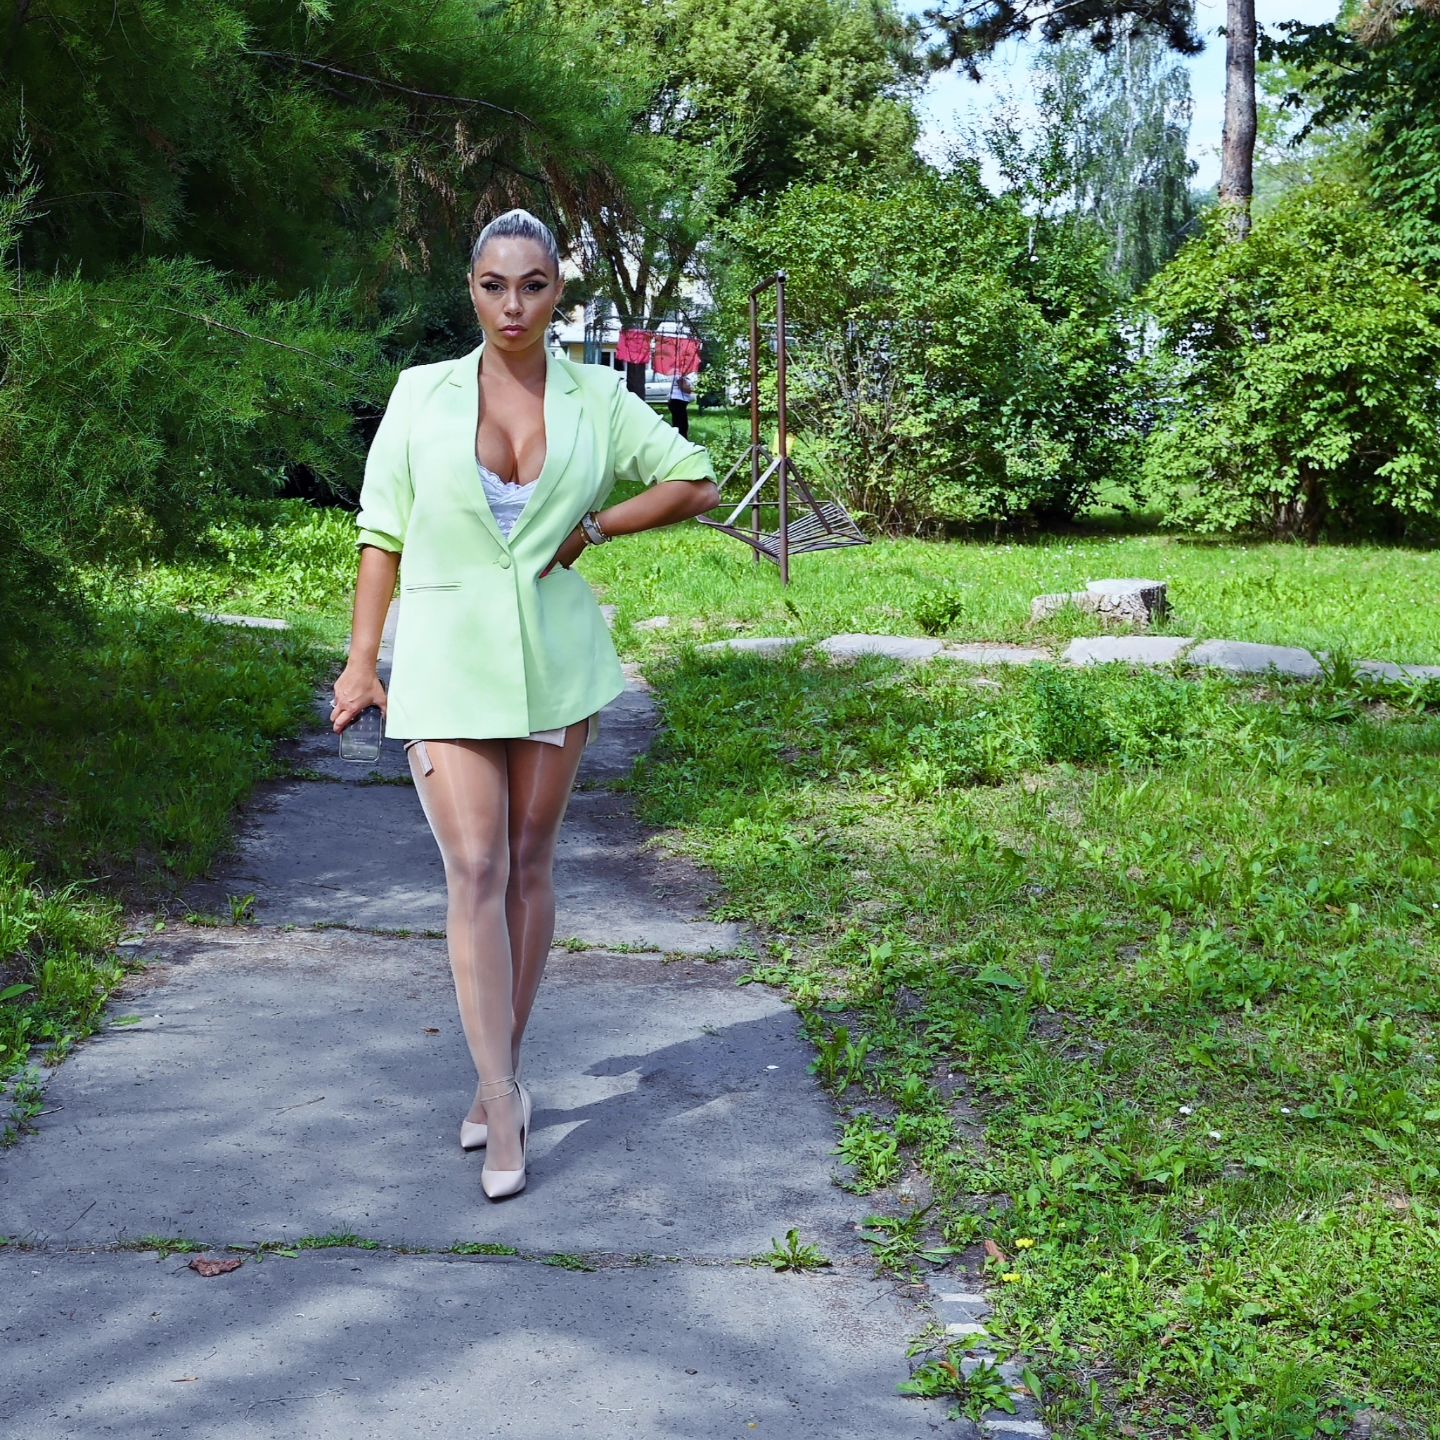 Elegant green - 💚 green business suit + beige mini skirt + white bustier top + nude color glossy pantyhose + beige red soles stiletto high heels.
.
.
.
.
#greenday #greenoutfit #miniskirt #highheelsaddiction #cleavage #centralpark #nudepantyhose #glossypantyhose #shinypantyhose  #streetstyle #strumpfhose #rajstopy #collant